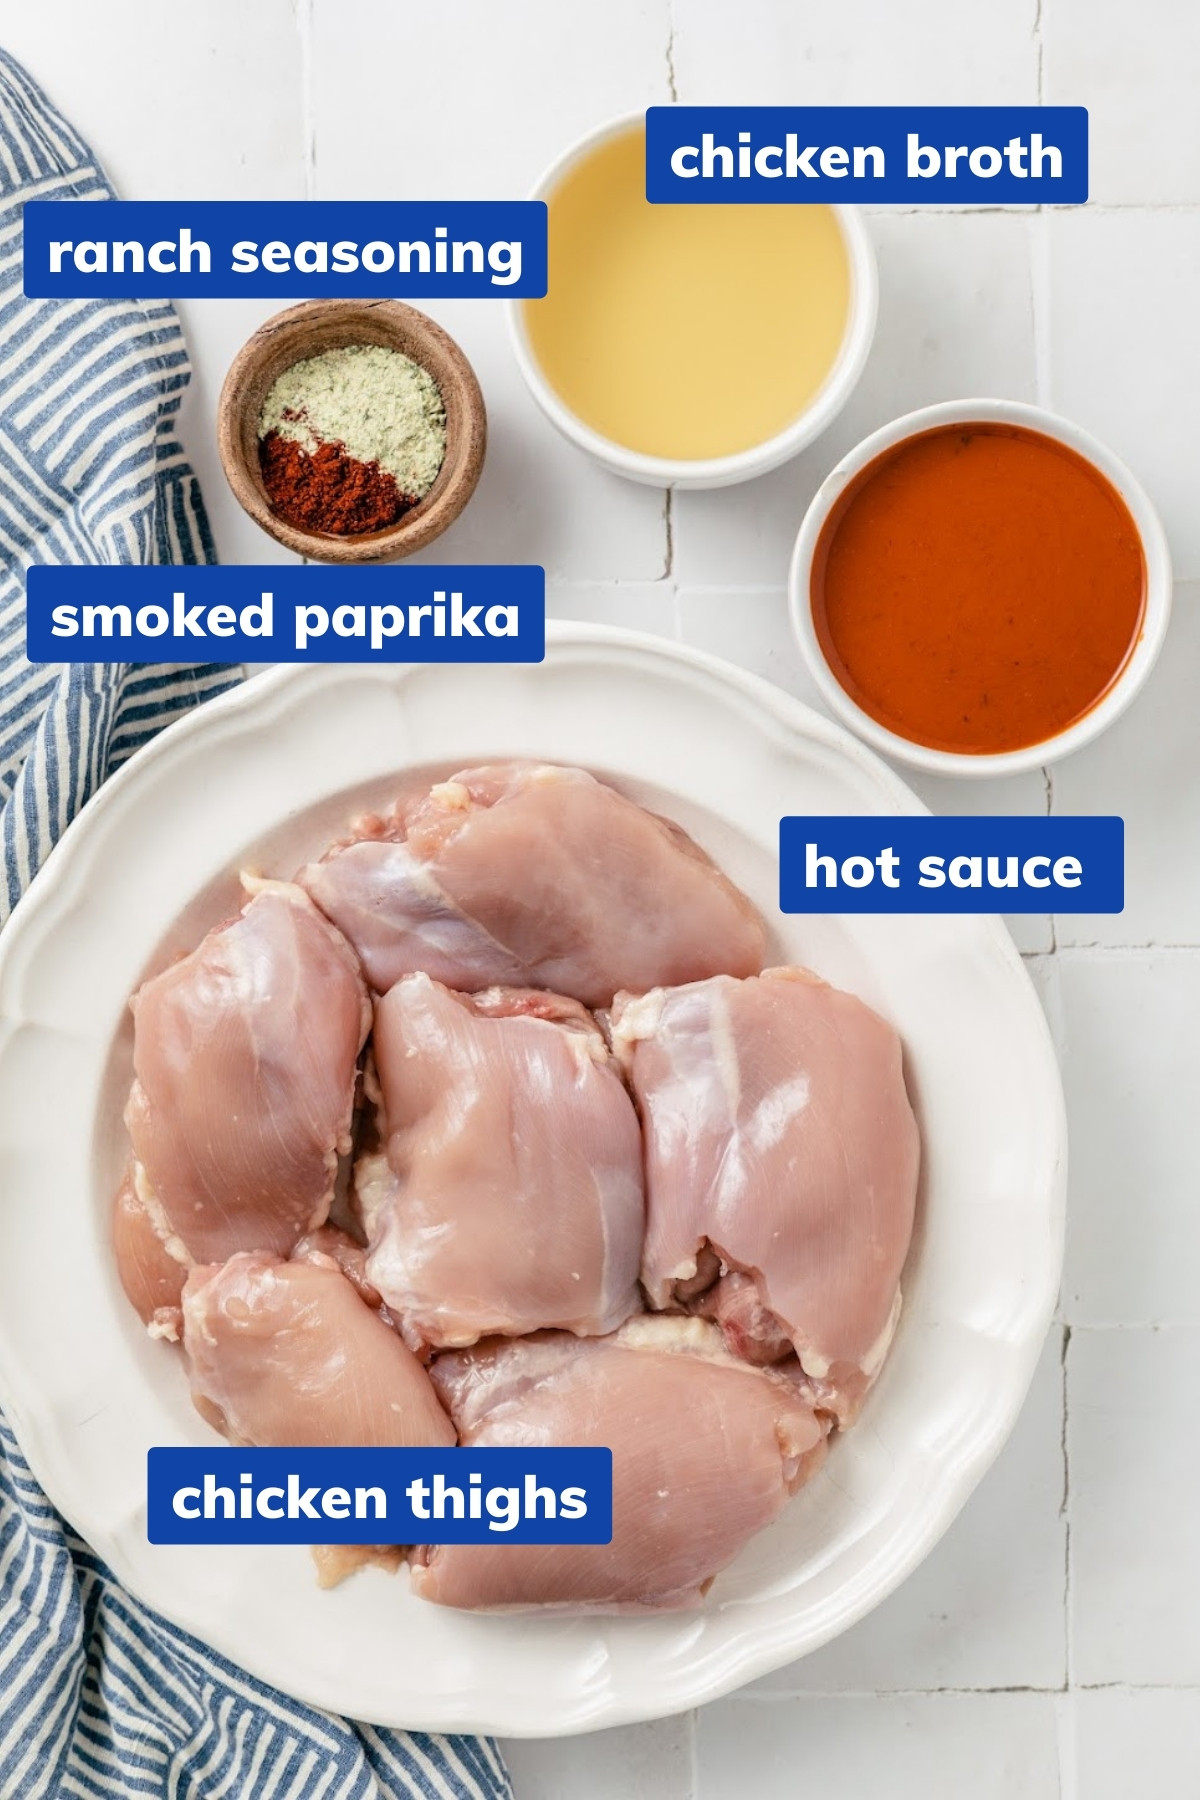 ingredients needed to make buffalo shredded chicken in an instant pot: Chicken thighs, Ranch seasoning, Smoked Paprika, Hot sauce and Chicken broth in separate bowls